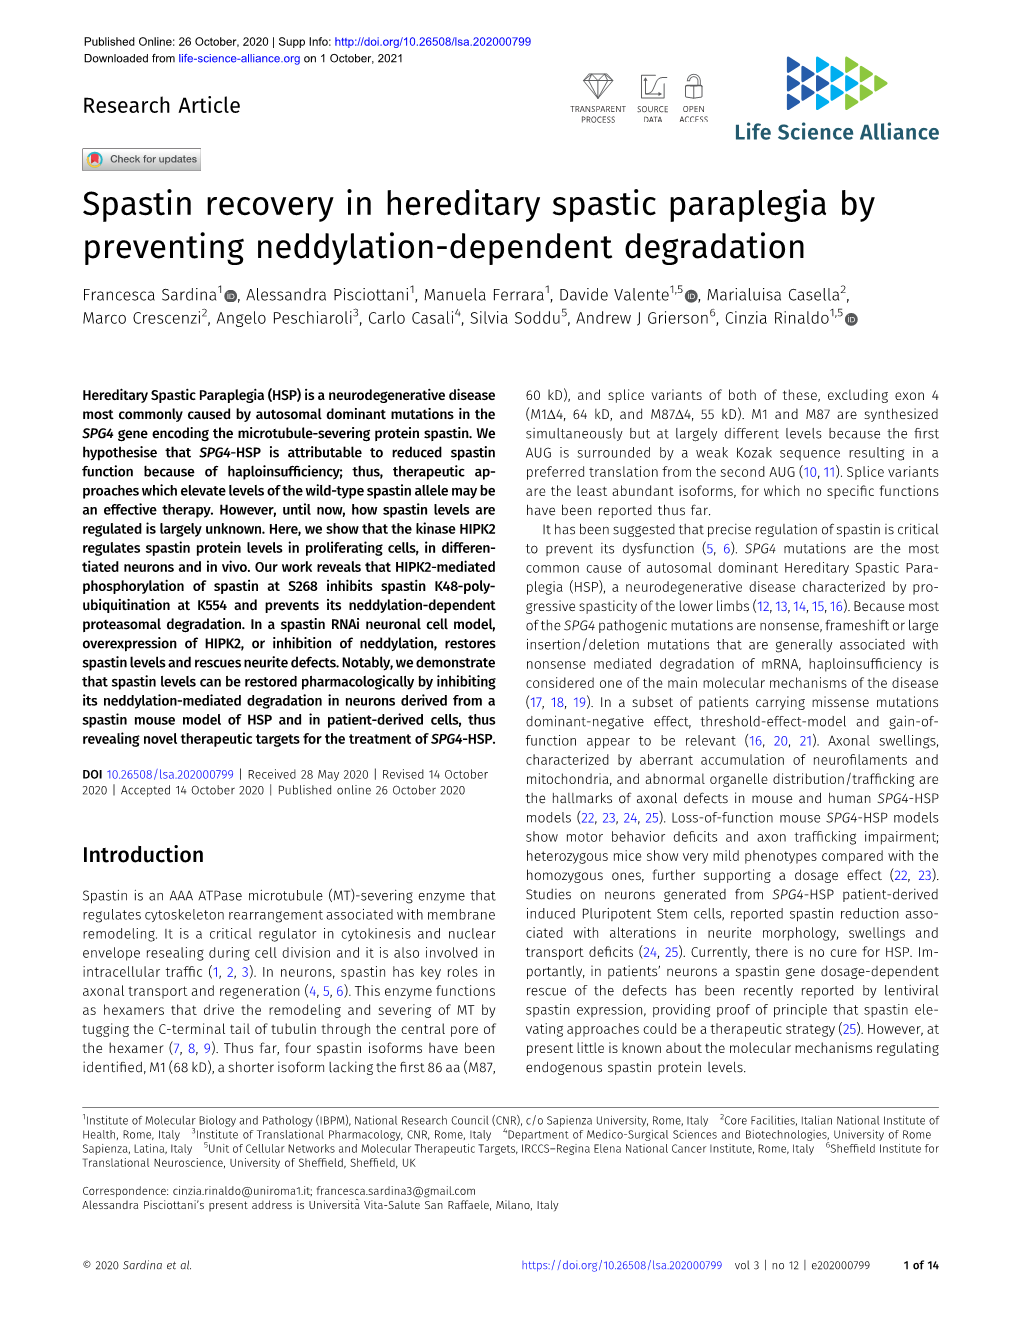 Spastin Recovery in Hereditary Spastic Paraplegia by Preventing Neddylation-Dependent Degradation